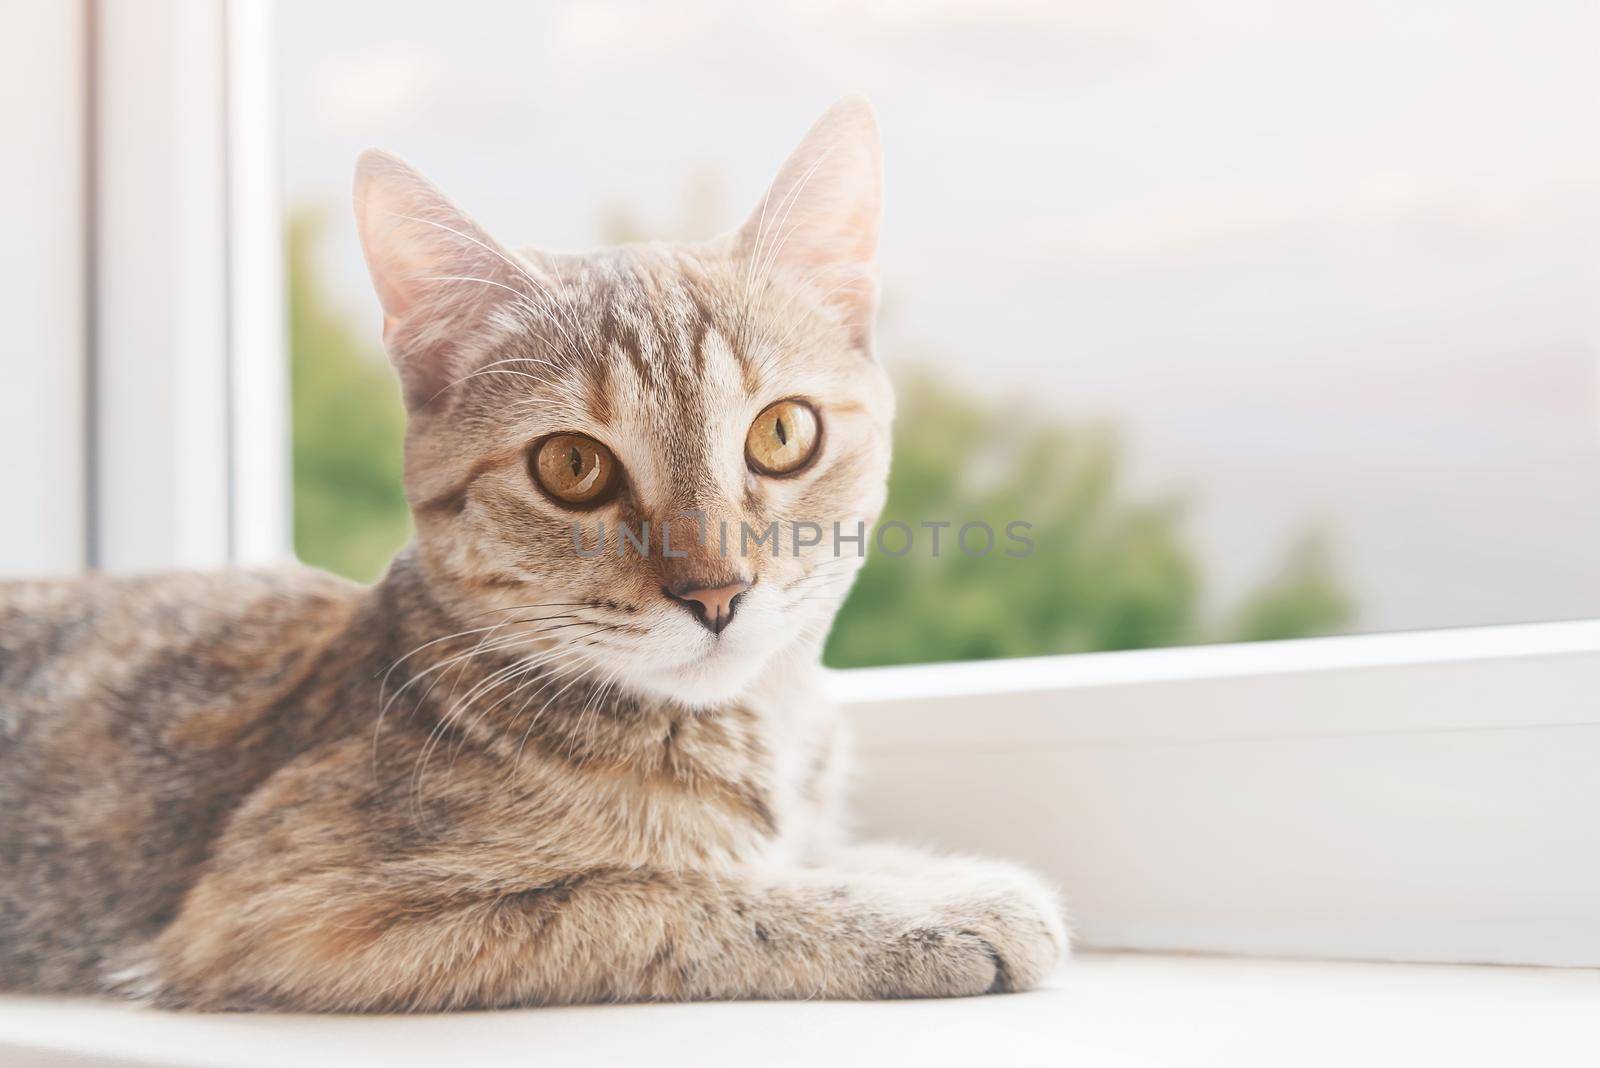 Cute cat lying on the windowsill, staring at camera. Green trees outside the window.